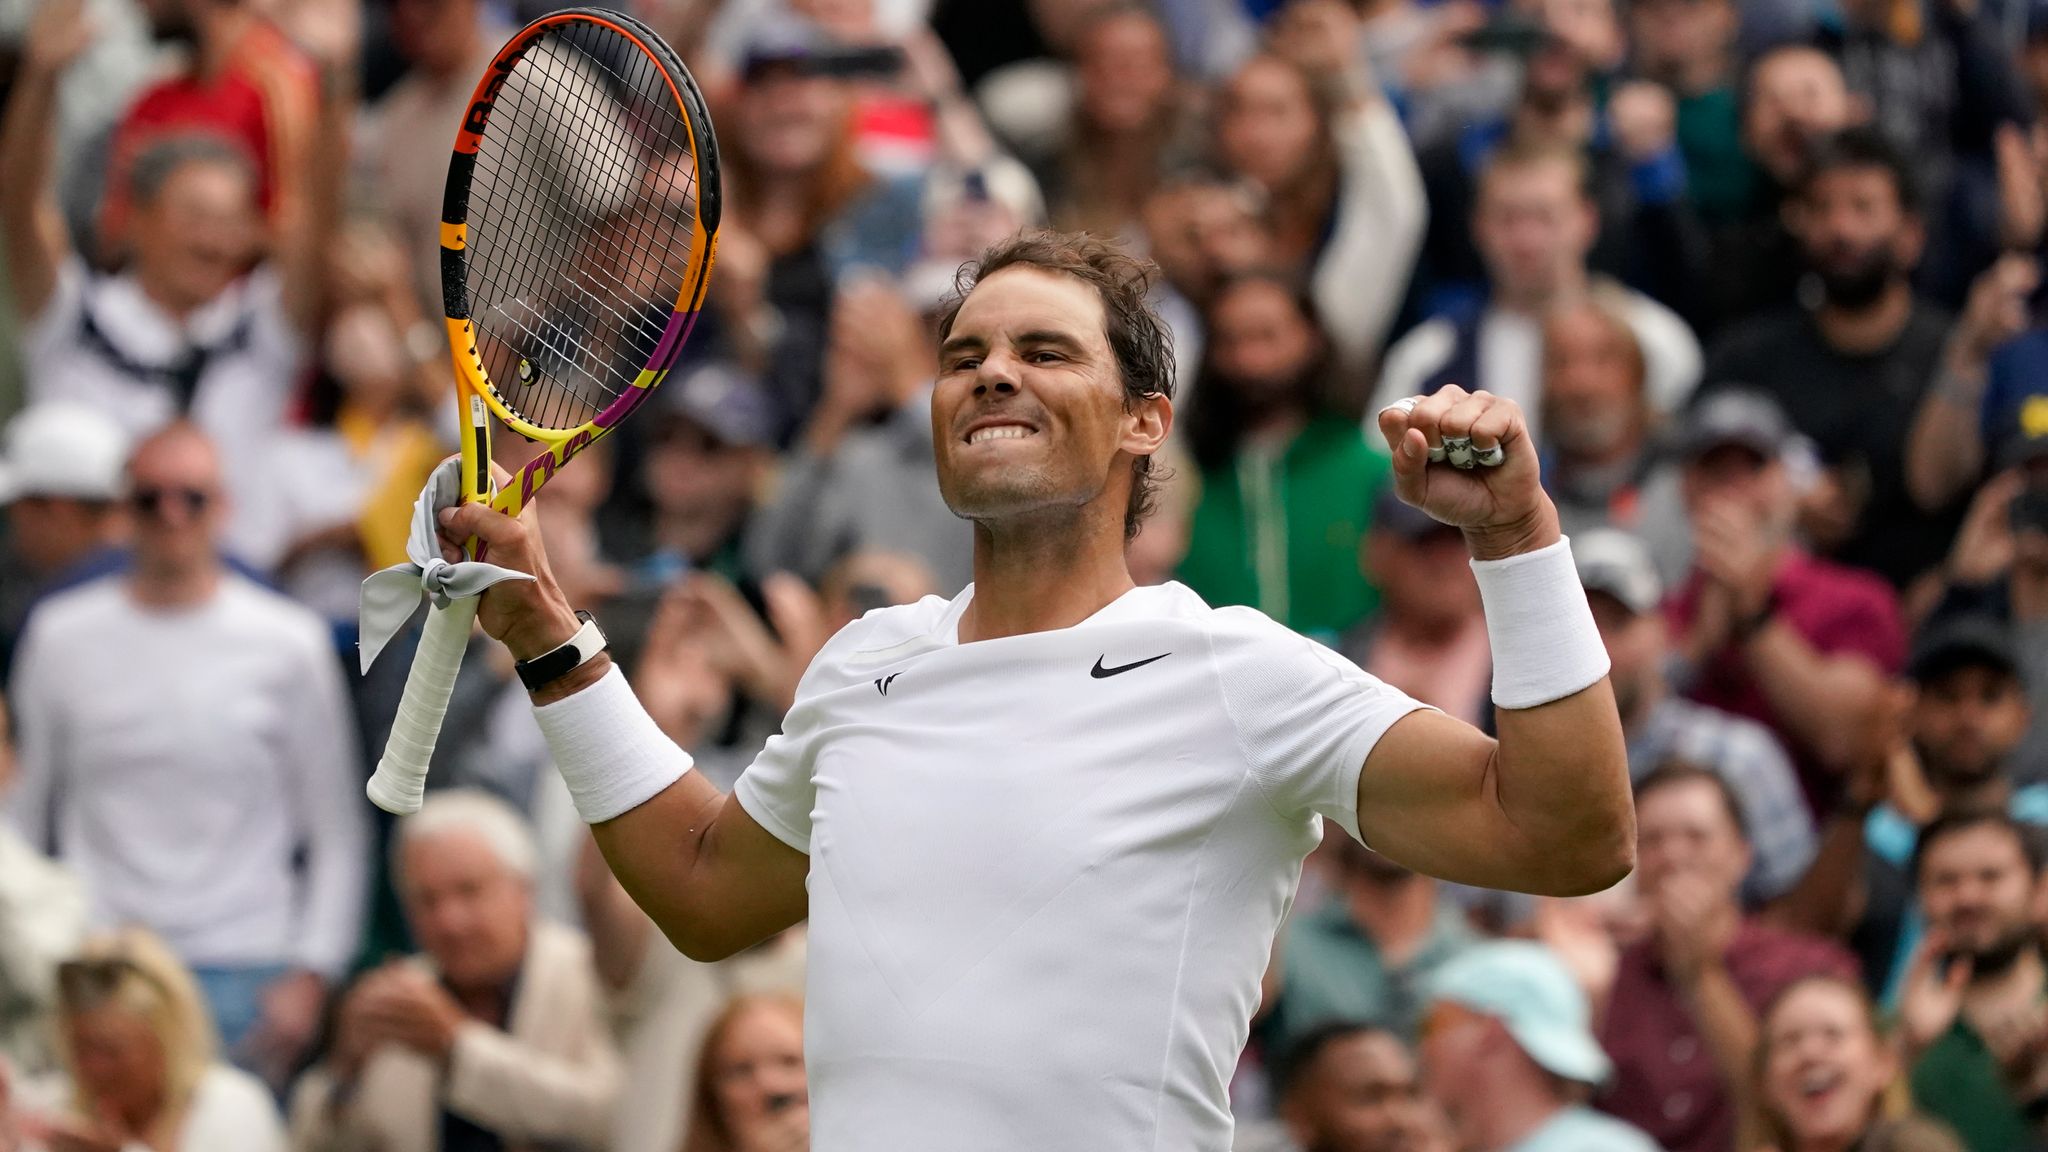 Wimbledon Rafael Nadal stays on course for calendar Grand Slam after opening win Tennis News Sky Sports